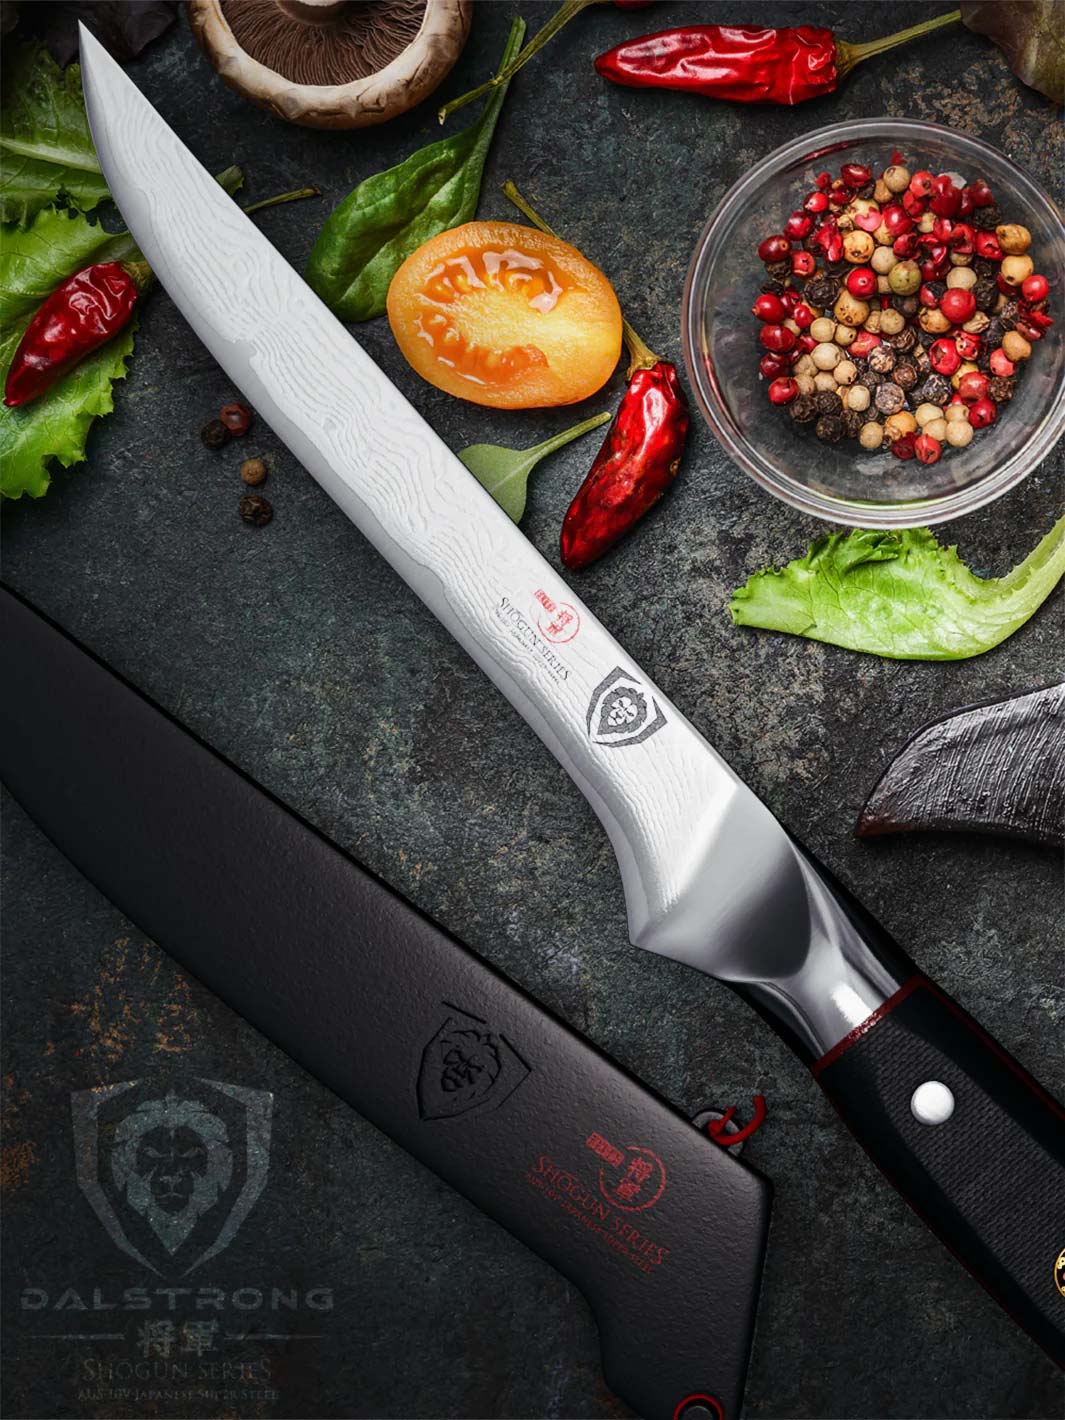 Dalstrong shogun series 6 inch boning knife with black handle with it's sheath and vegetables.